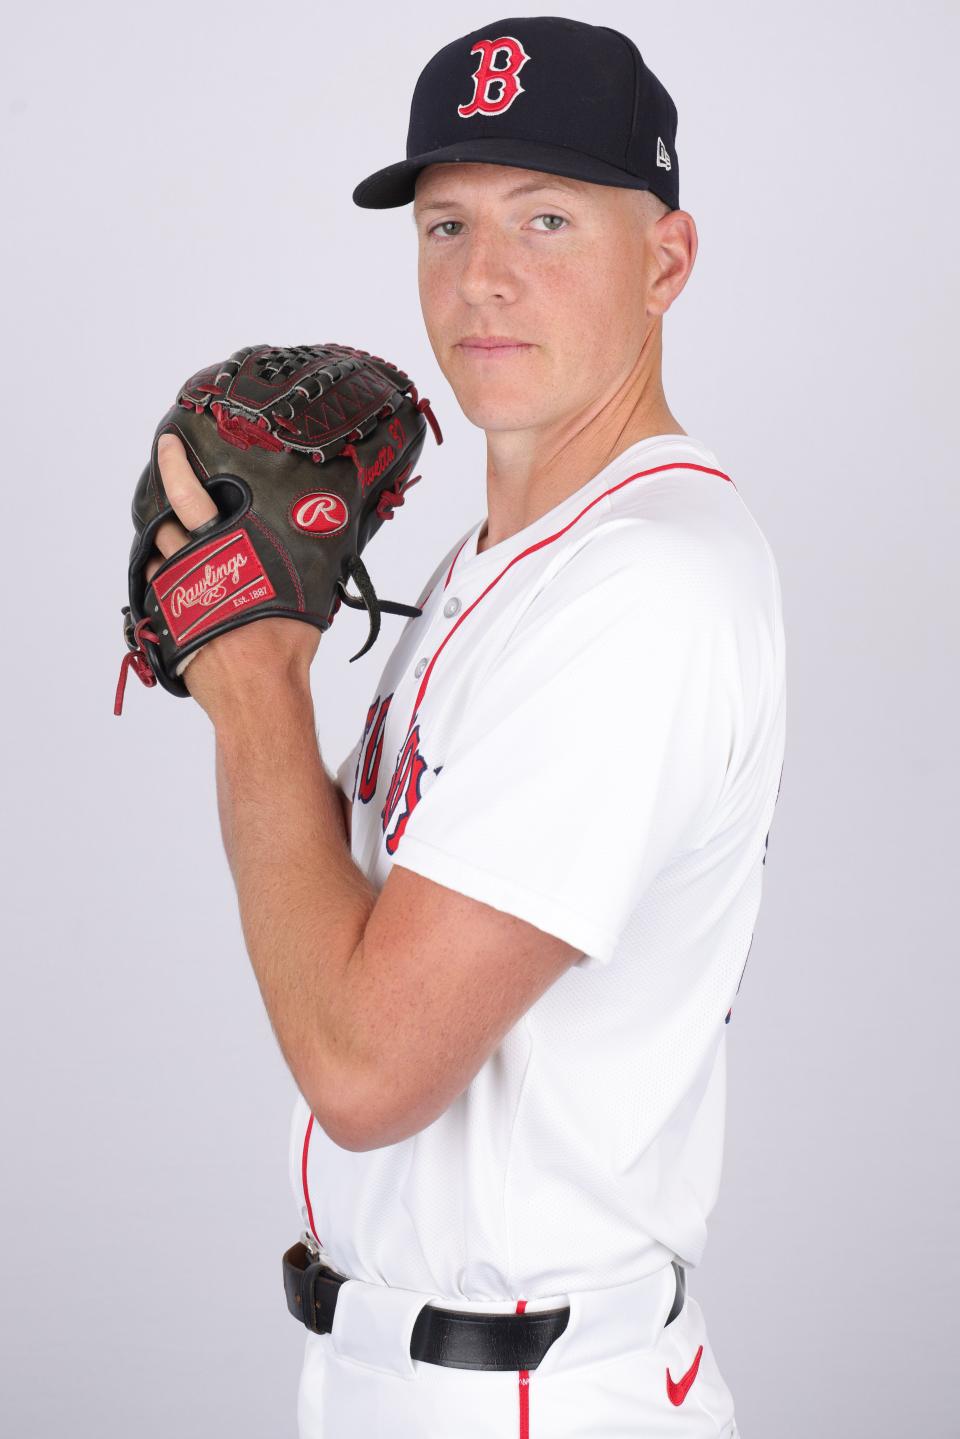 Red Sox pitcher Nick Pivetta poses during media day on Feb. 20 at JetBlue Park.